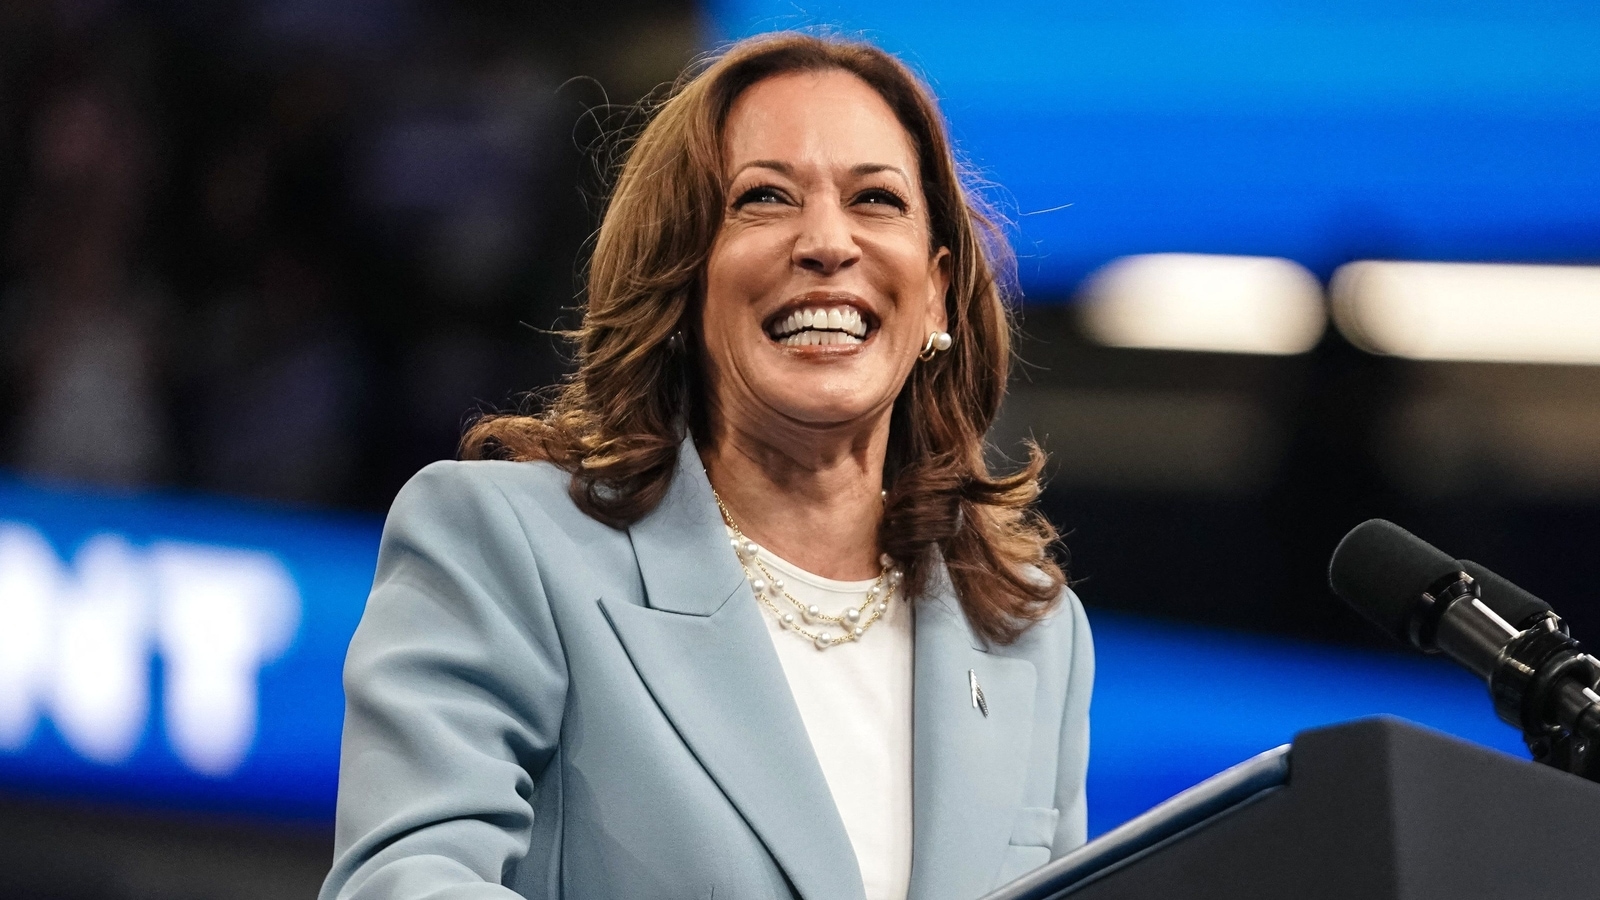 Kamala Harris trolled for speaking in ‘Southern accent’ at Atlanta rally: ‘The most cringe ever’